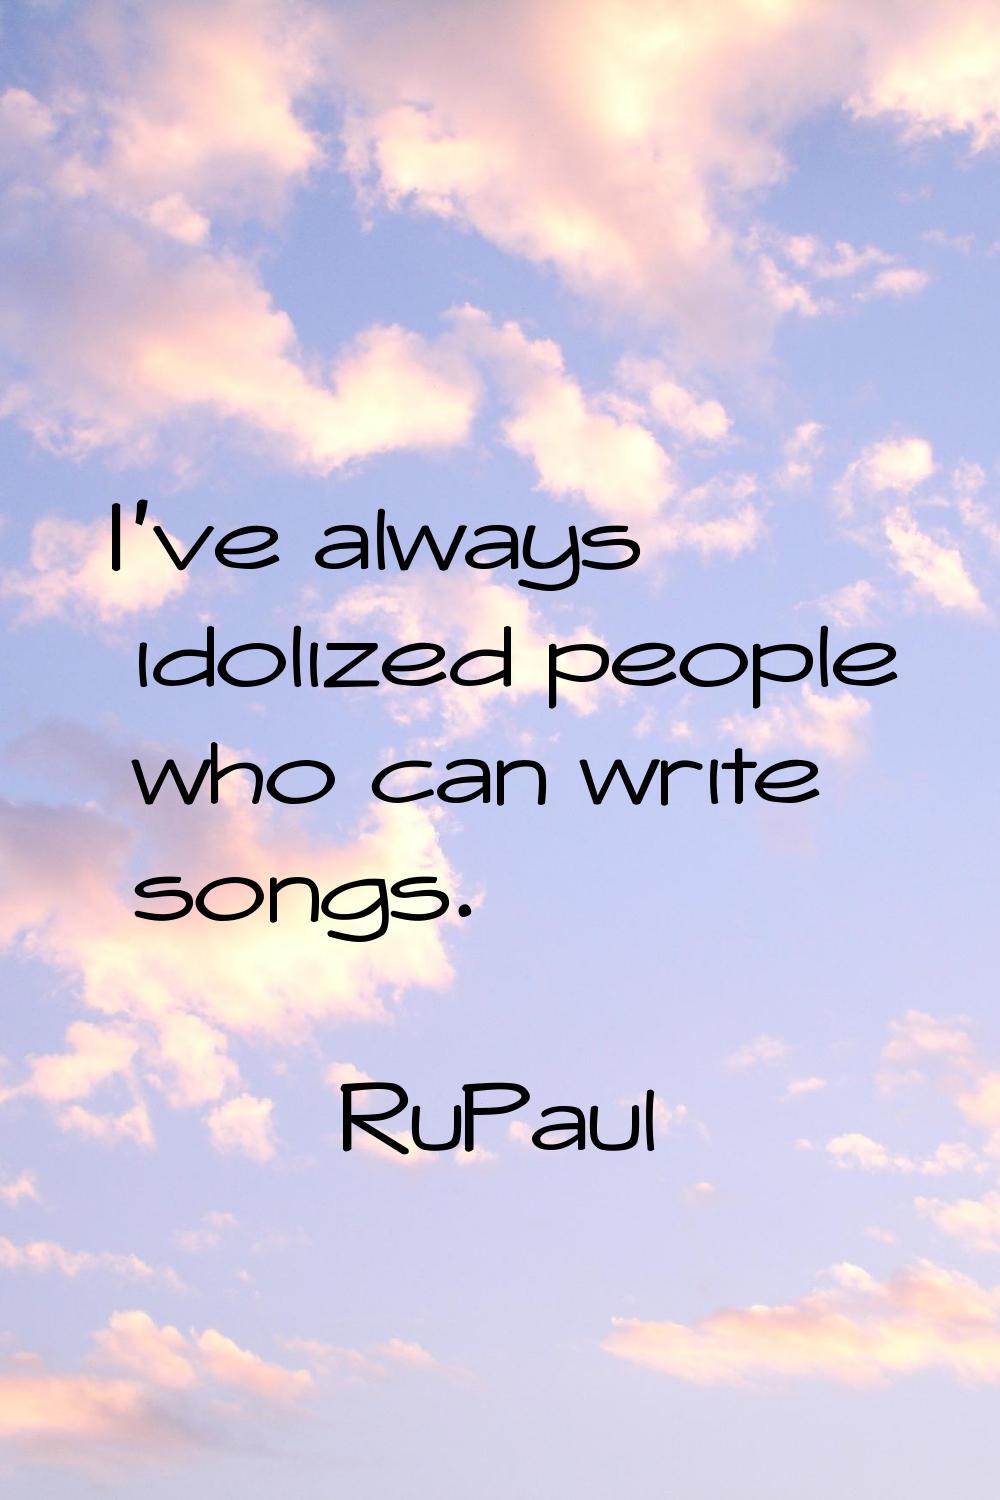 I've always idolized people who can write songs.